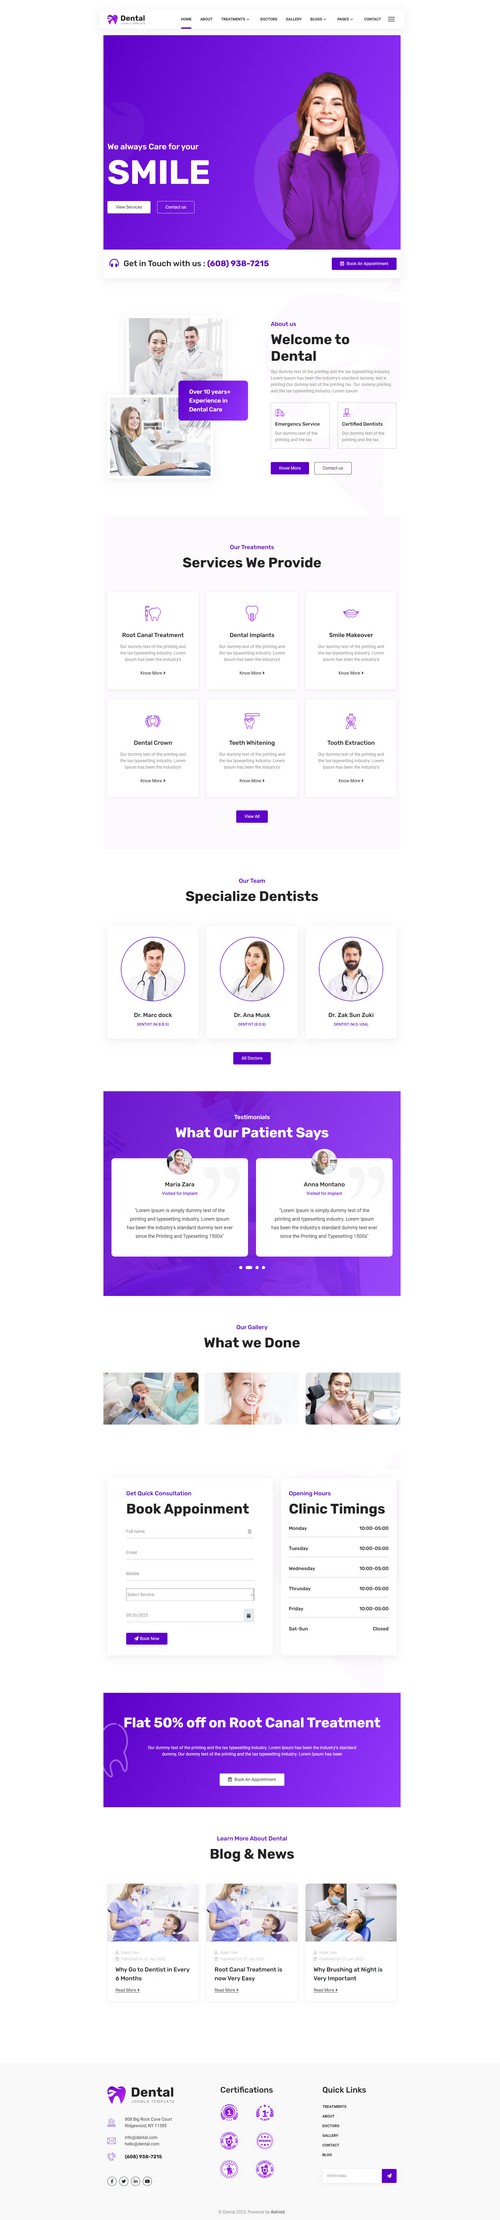 Dental - Professional Joomla 4 Tmplate for Clinics and Dentists